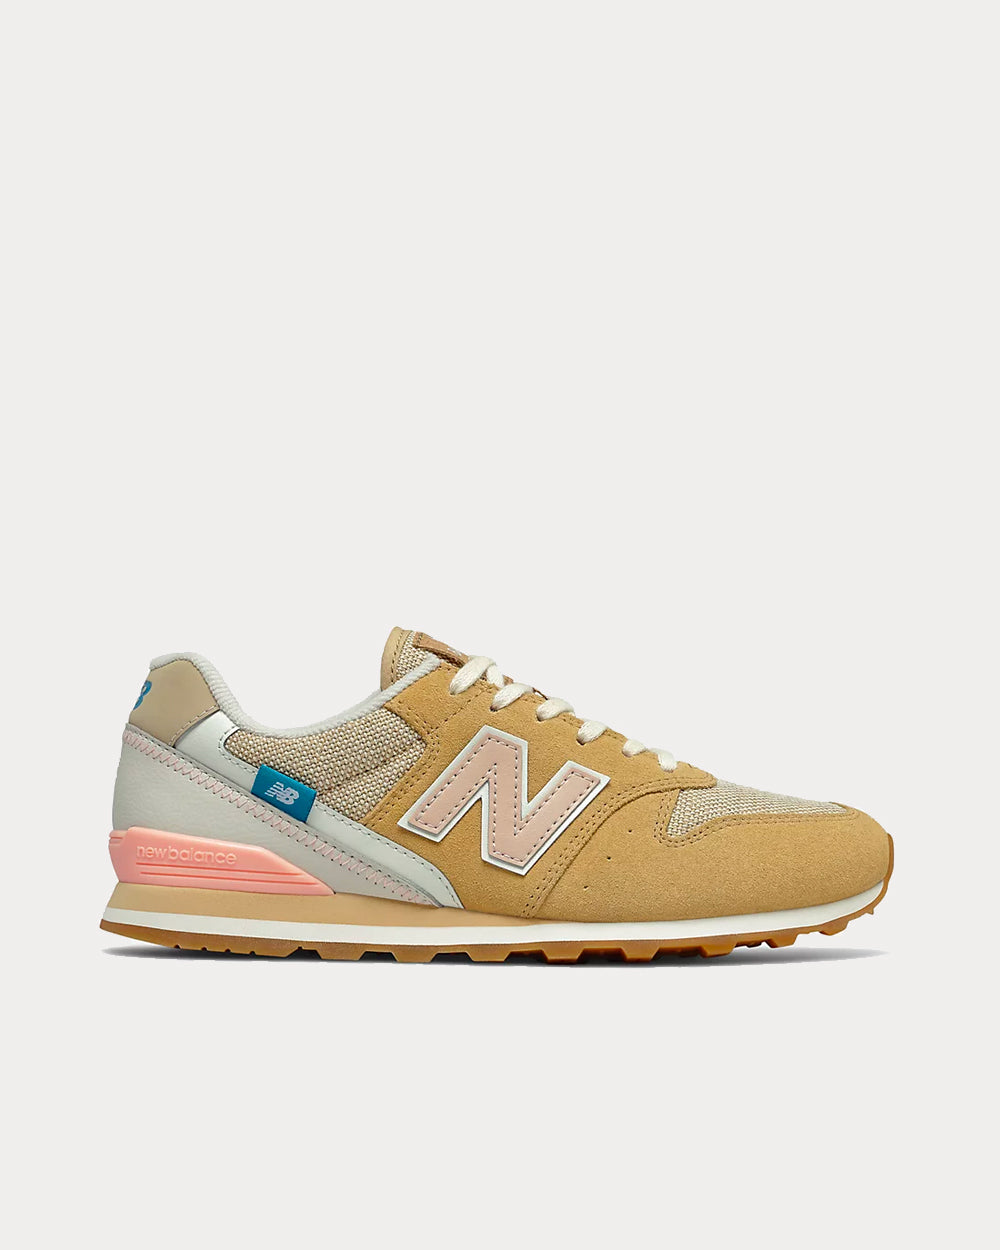 New Balance 996 with Cloud Pink Top Sneakers - Sneak in Peace